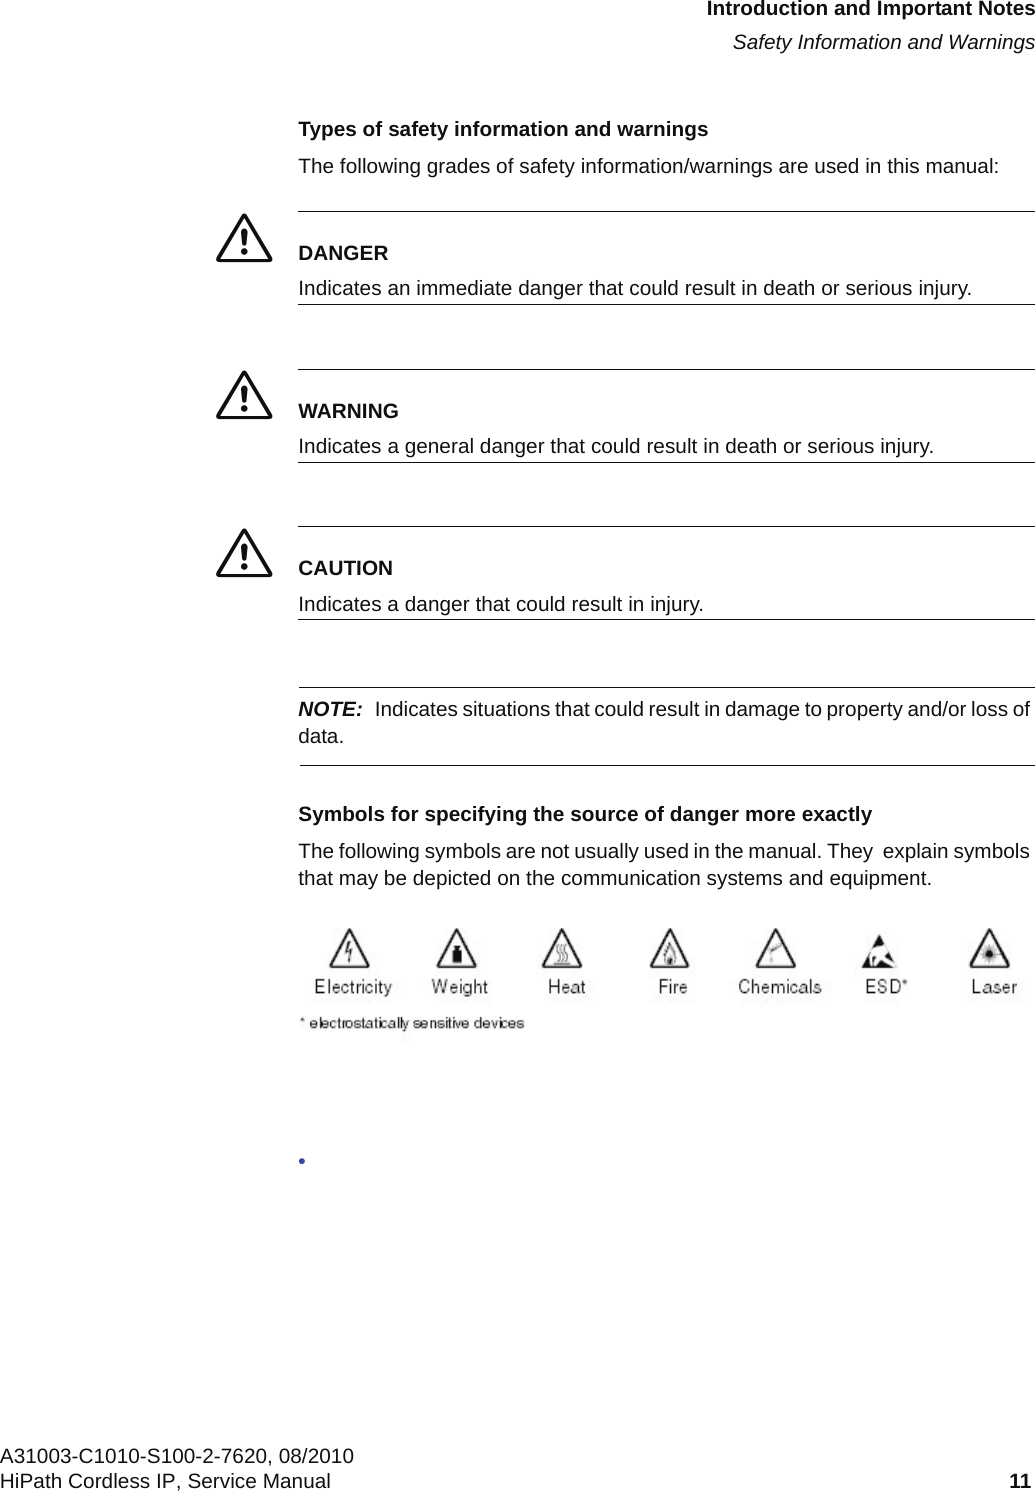 c01.fmIntroduction and Important NotesSafety Information and WarningsA31003-C1010-S100-2-7620, 08/2010HiPath Cordless IP, Service Manual 11            Types of safety information and warningsThe following grades of safety information/warnings are used in this manual:7DANGERIndicates an immediate danger that could result in death or serious injury.7WARNINGIndicates a general danger that could result in death or serious injury.7CAUTIONIndicates a danger that could result in injury.NOTE: Indicates situations that could result in damage to property and/or loss of data.Symbols for specifying the source of danger more exactlyThe following symbols are not usually used in the manual. They  explain symbols that may be depicted on the communication systems and equipment.•